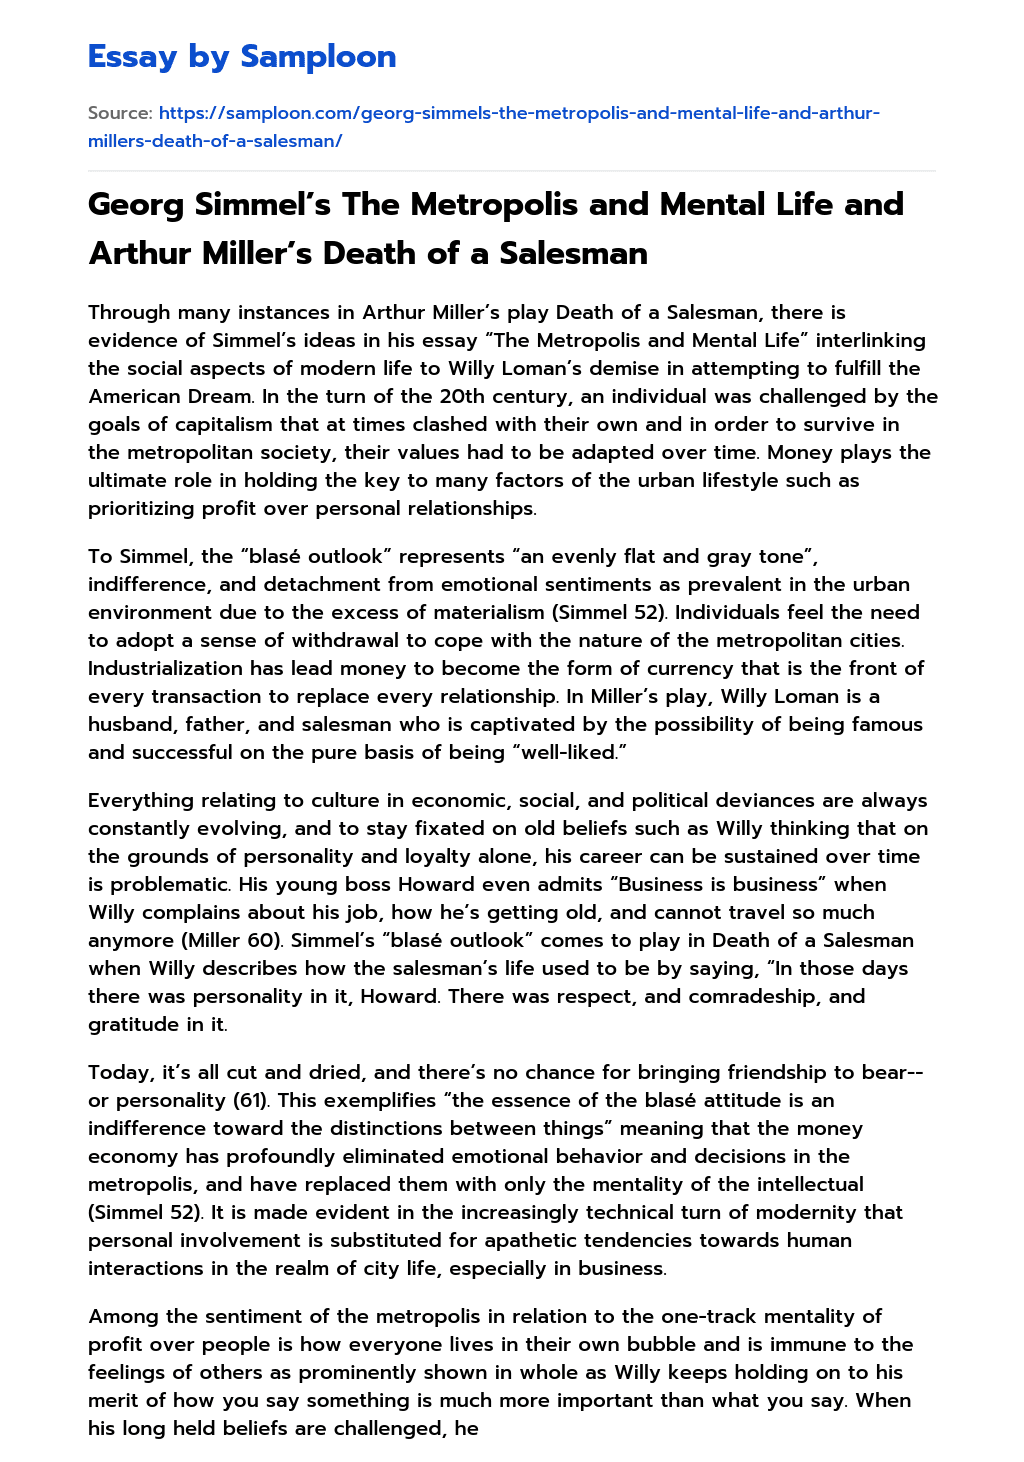 Georg Simmel’s The Metropolis and Mental Life and Arthur Miller’s Death of a Salesman Summary essay